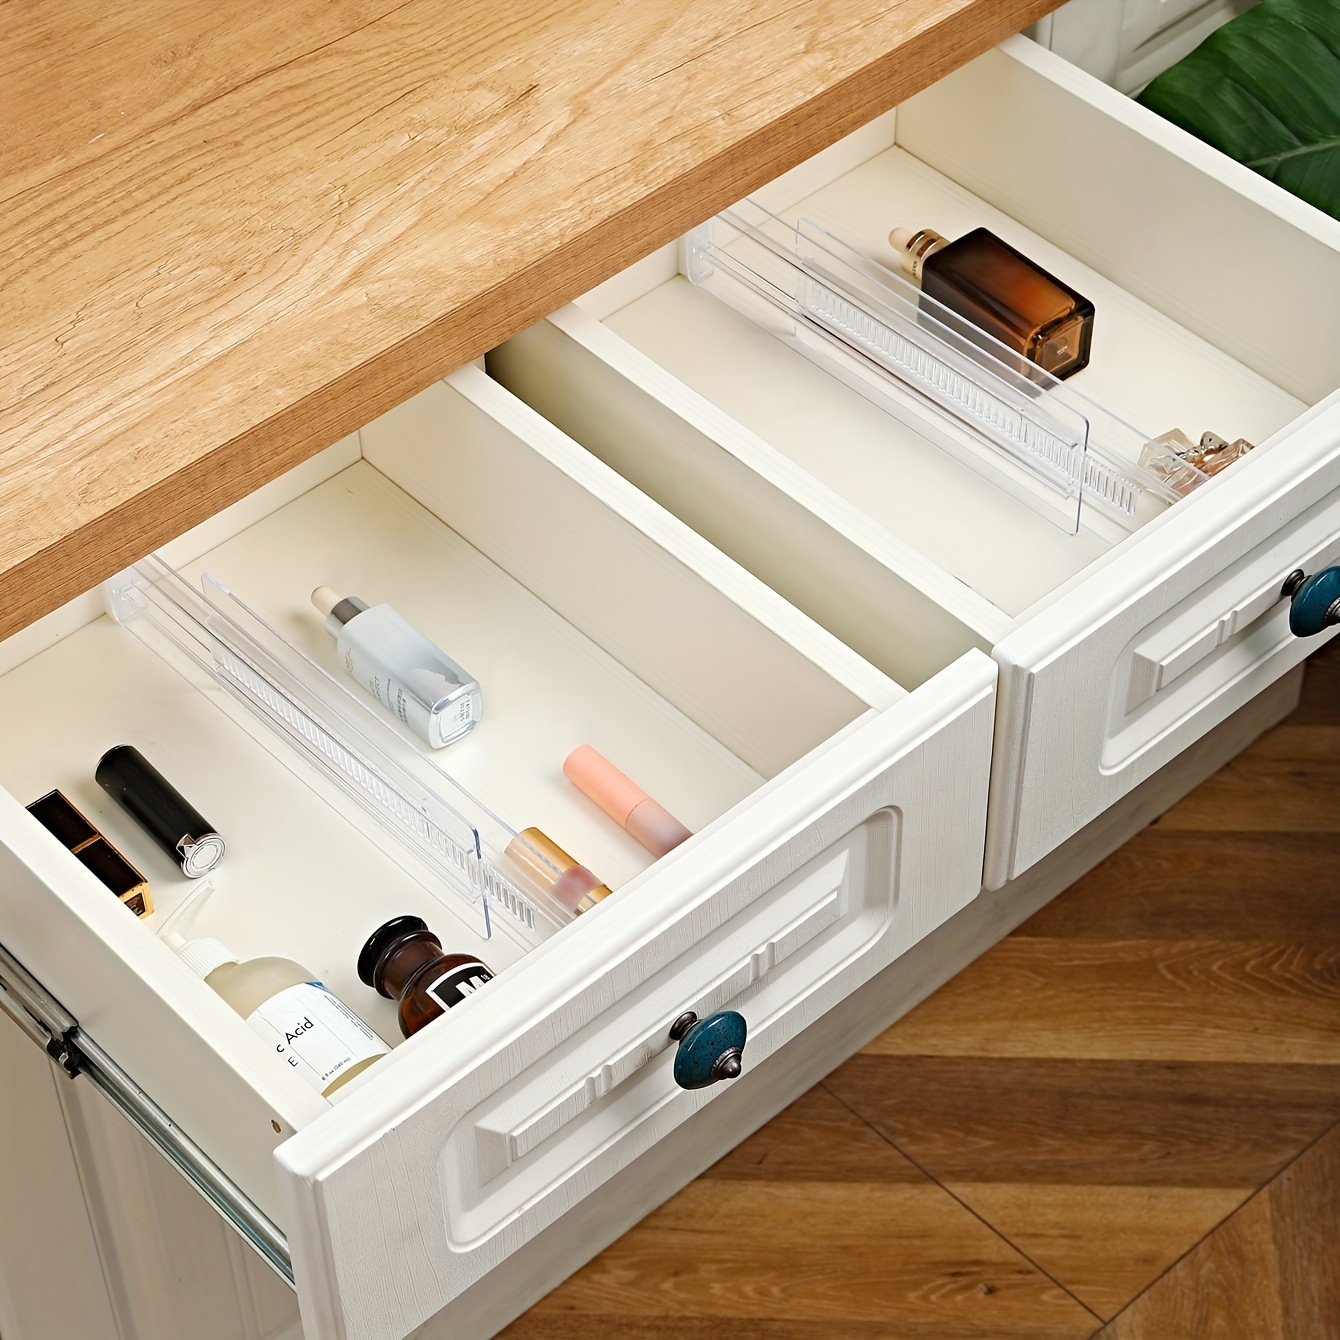 4 Expandable Drawer Dividers